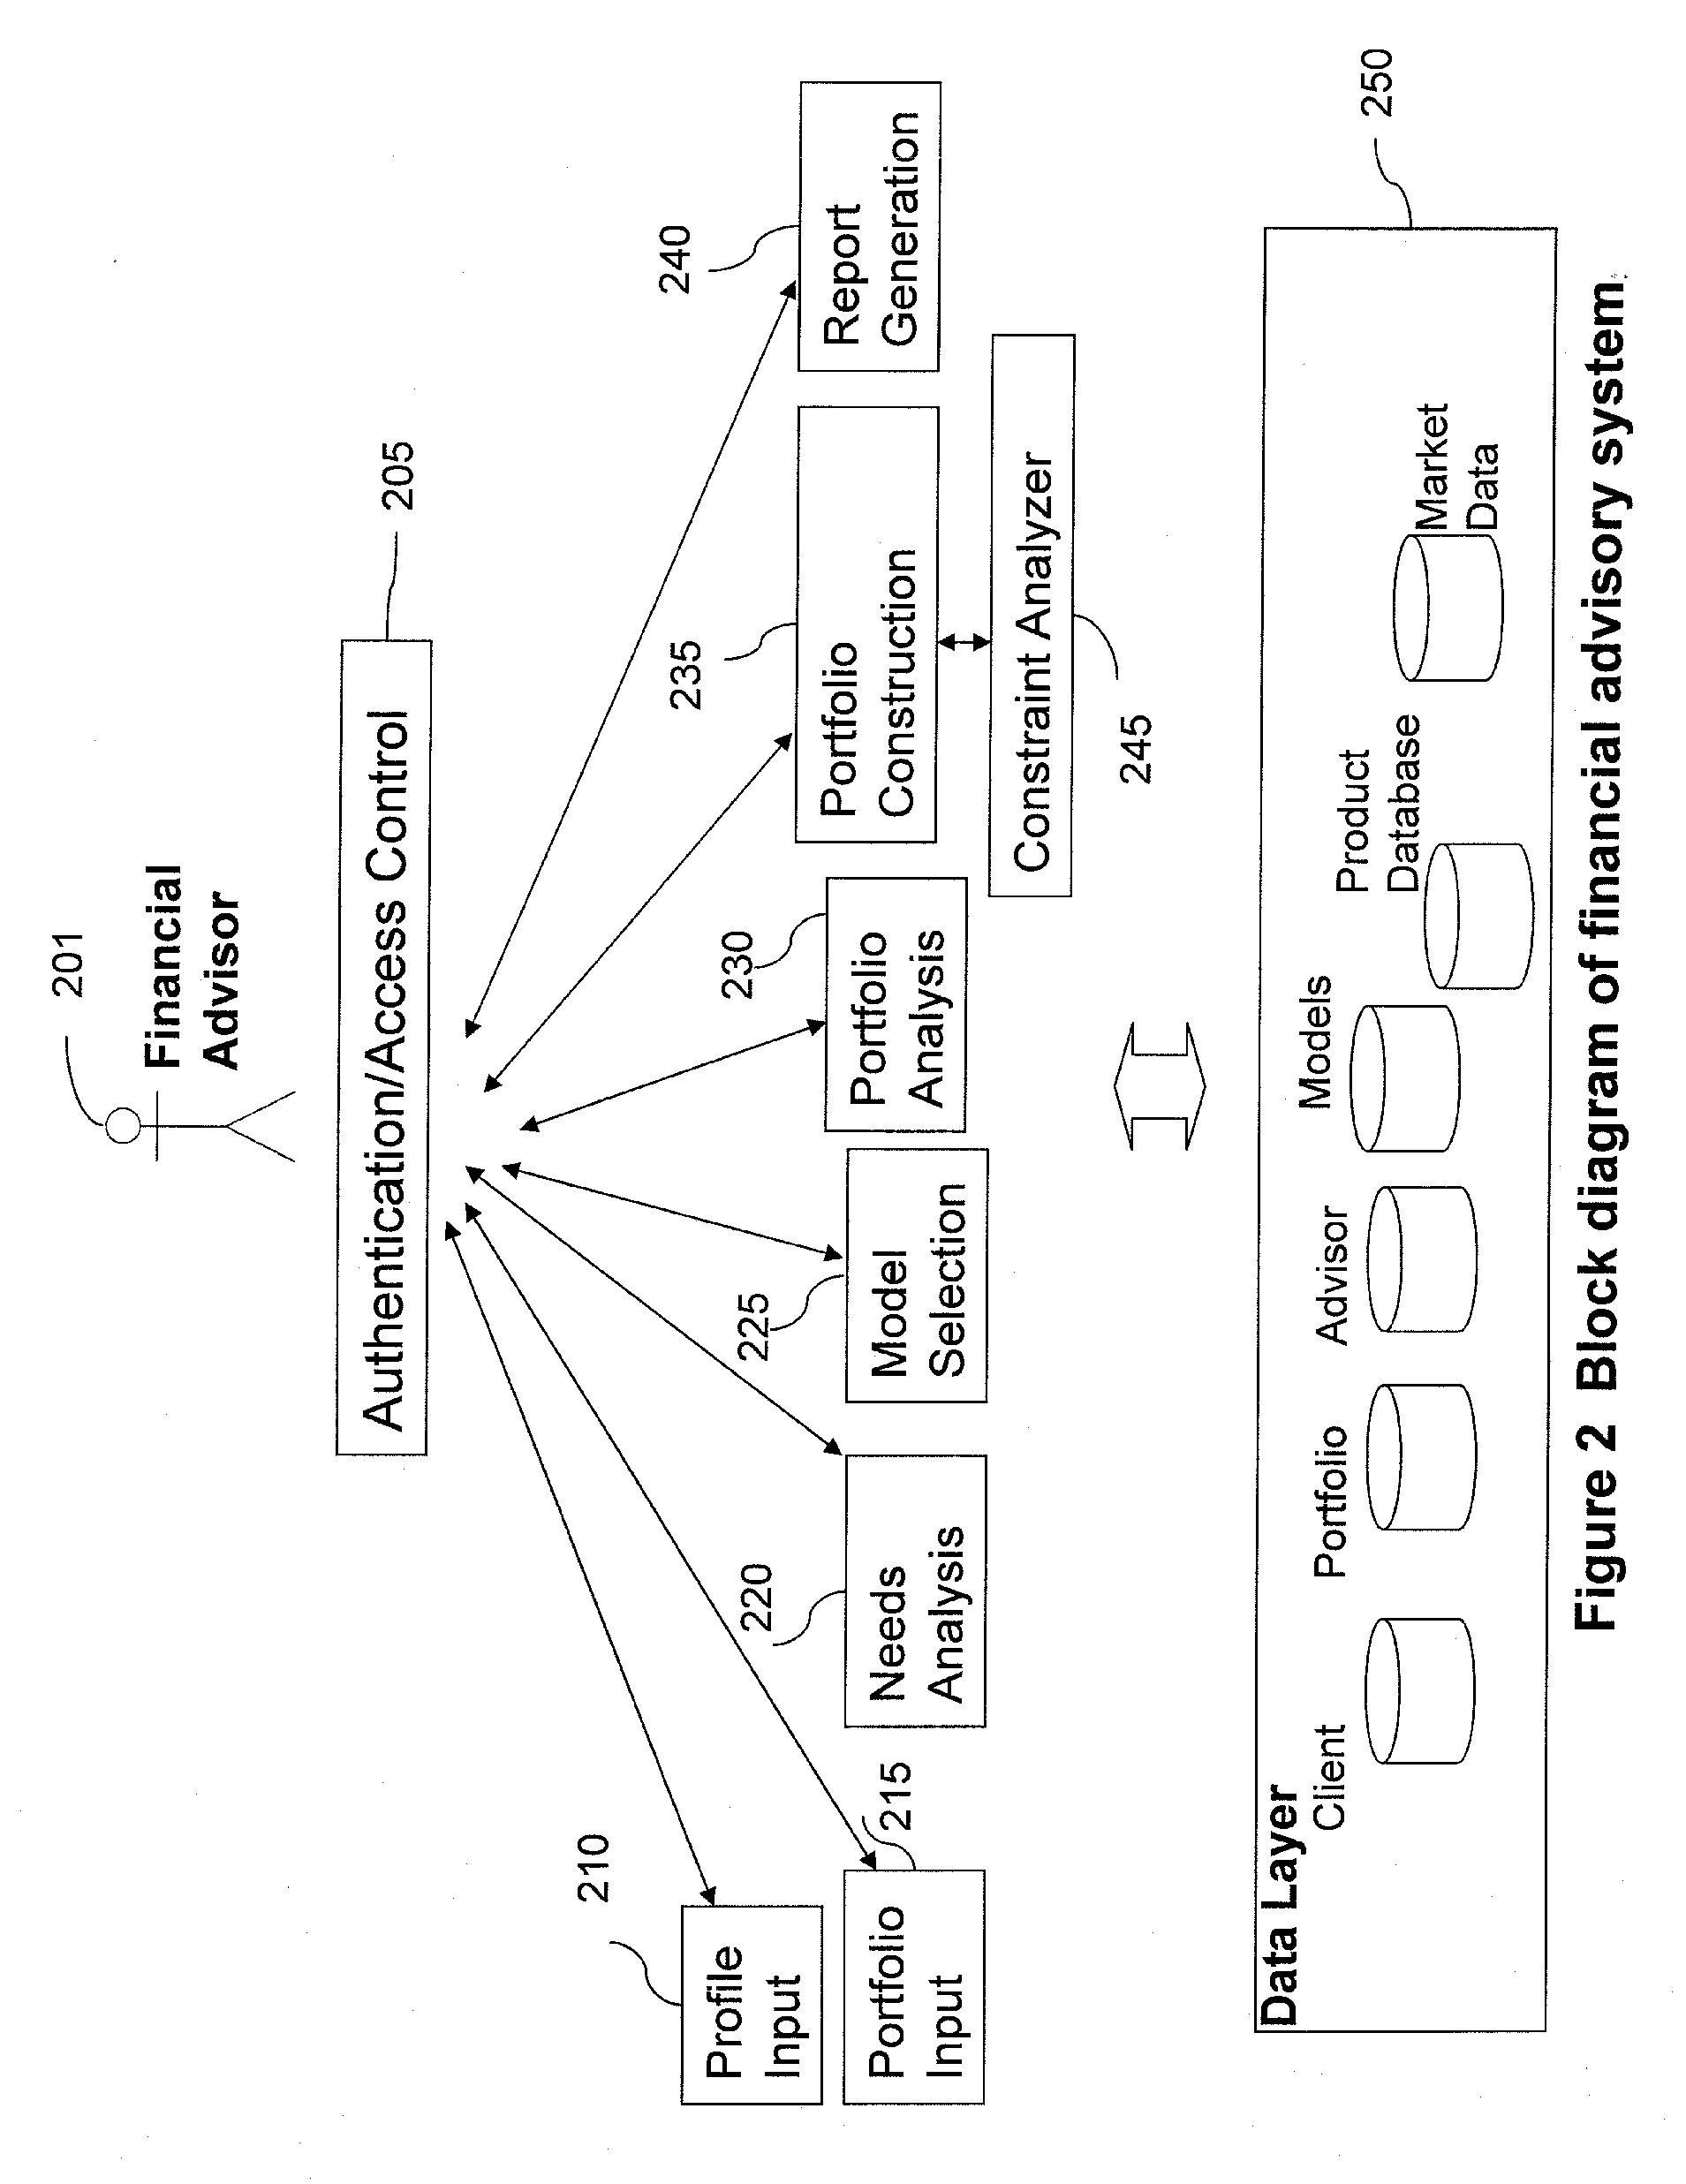 Systems and Methods for Real-time, Dynamic Multi-Dimensional Constraint Analysis of Portfolios of Financial Instruments